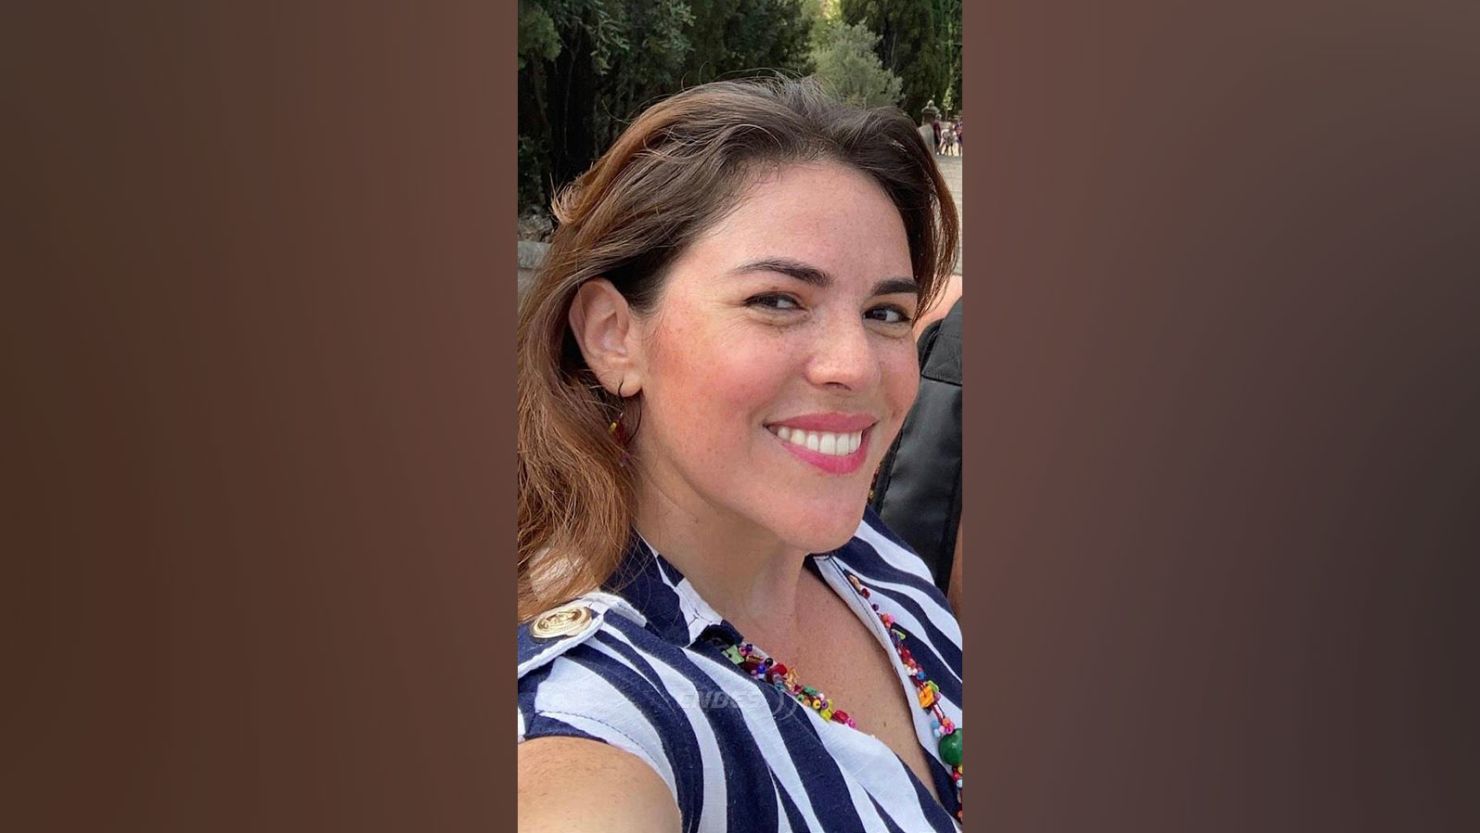 Spanish police are investigating the disappearance of Ana Maria Knezevich Henao, a 40-year-old American woman, who was reported missing in Madrid in February.